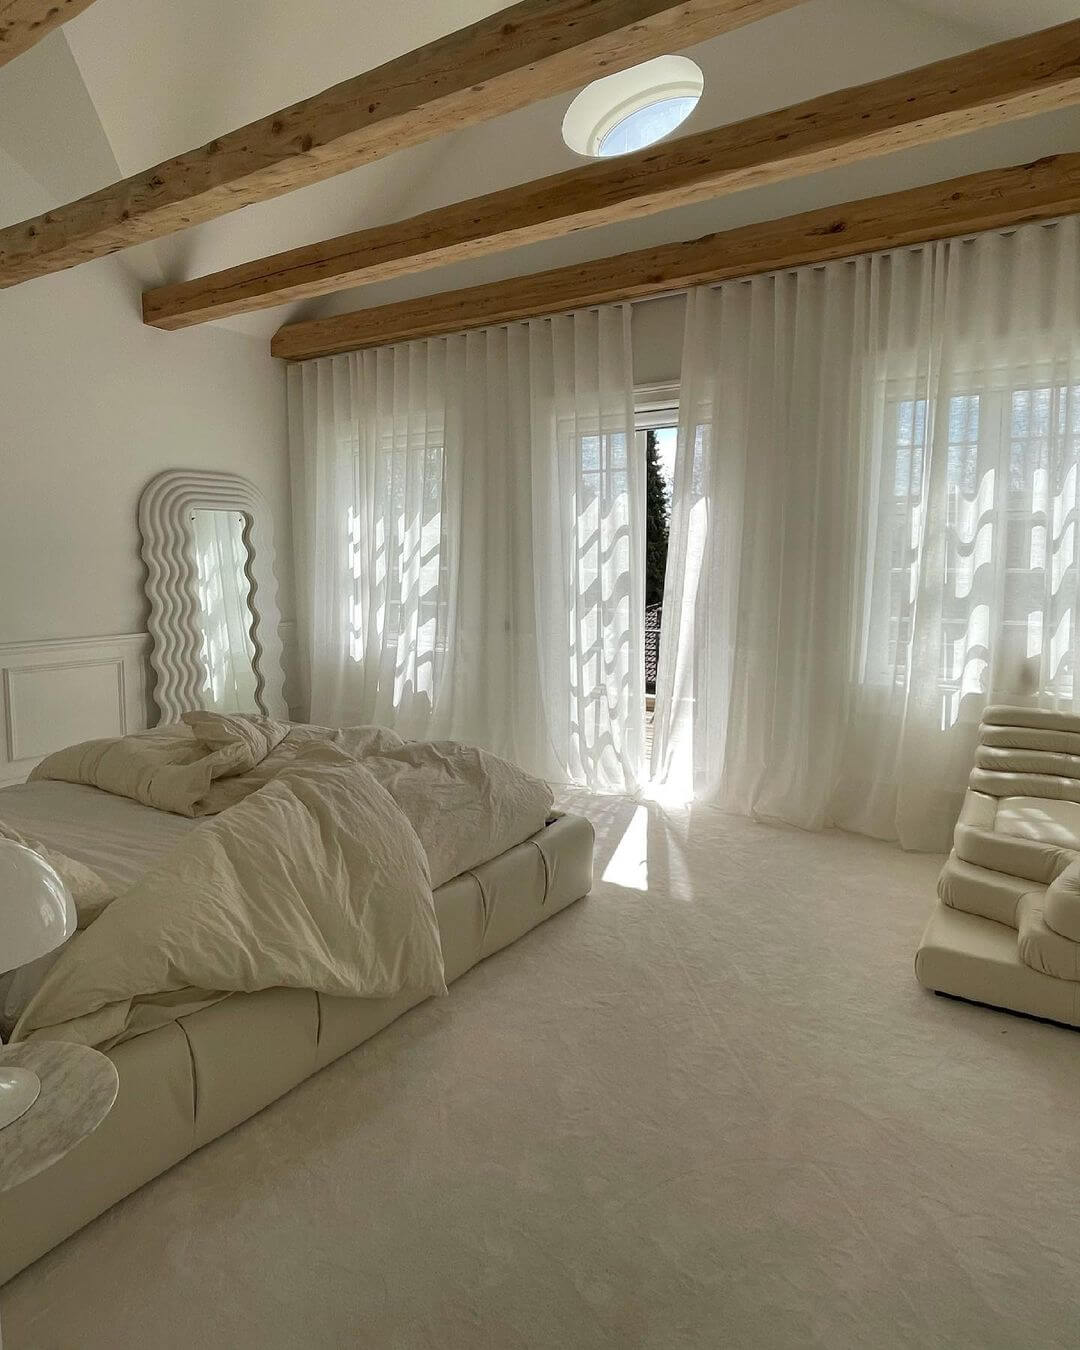 All White Bedroom of danish fashion influencer and stylist Pernille Teisbaek